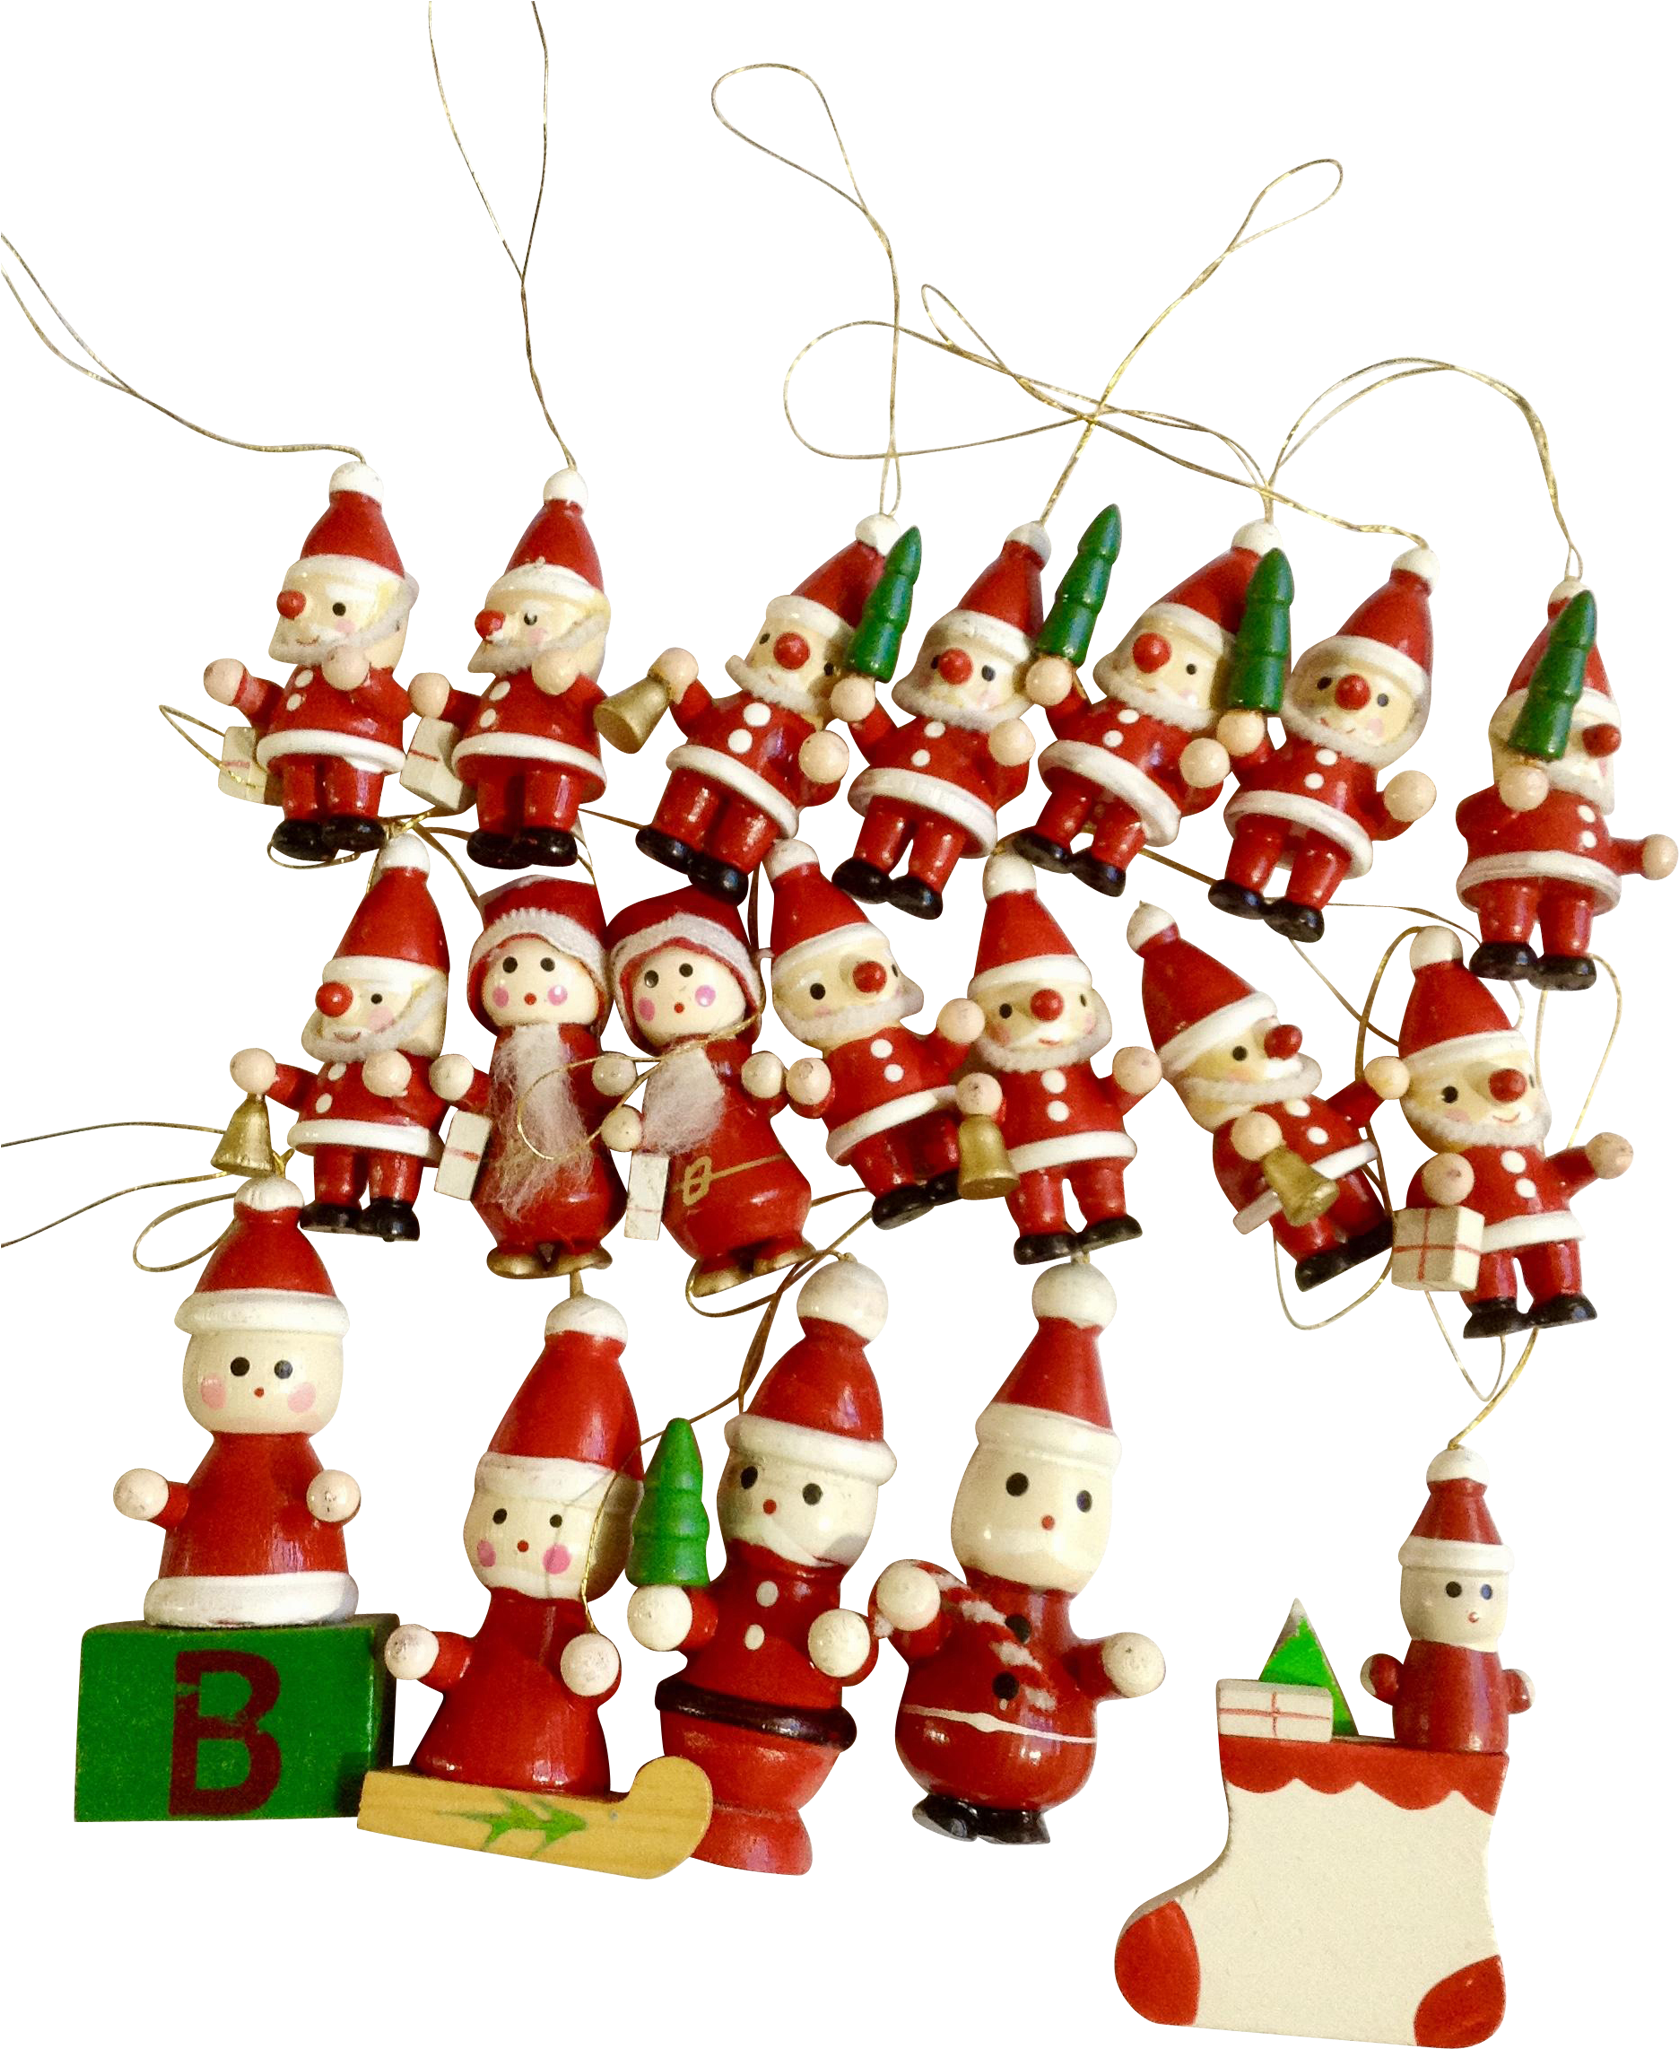 19 Vintage Wooden Santa Claus Hand Painted Christmas - 19 Vintage Wooden Santa Claus Hand Painted Christmas (2048x2048)